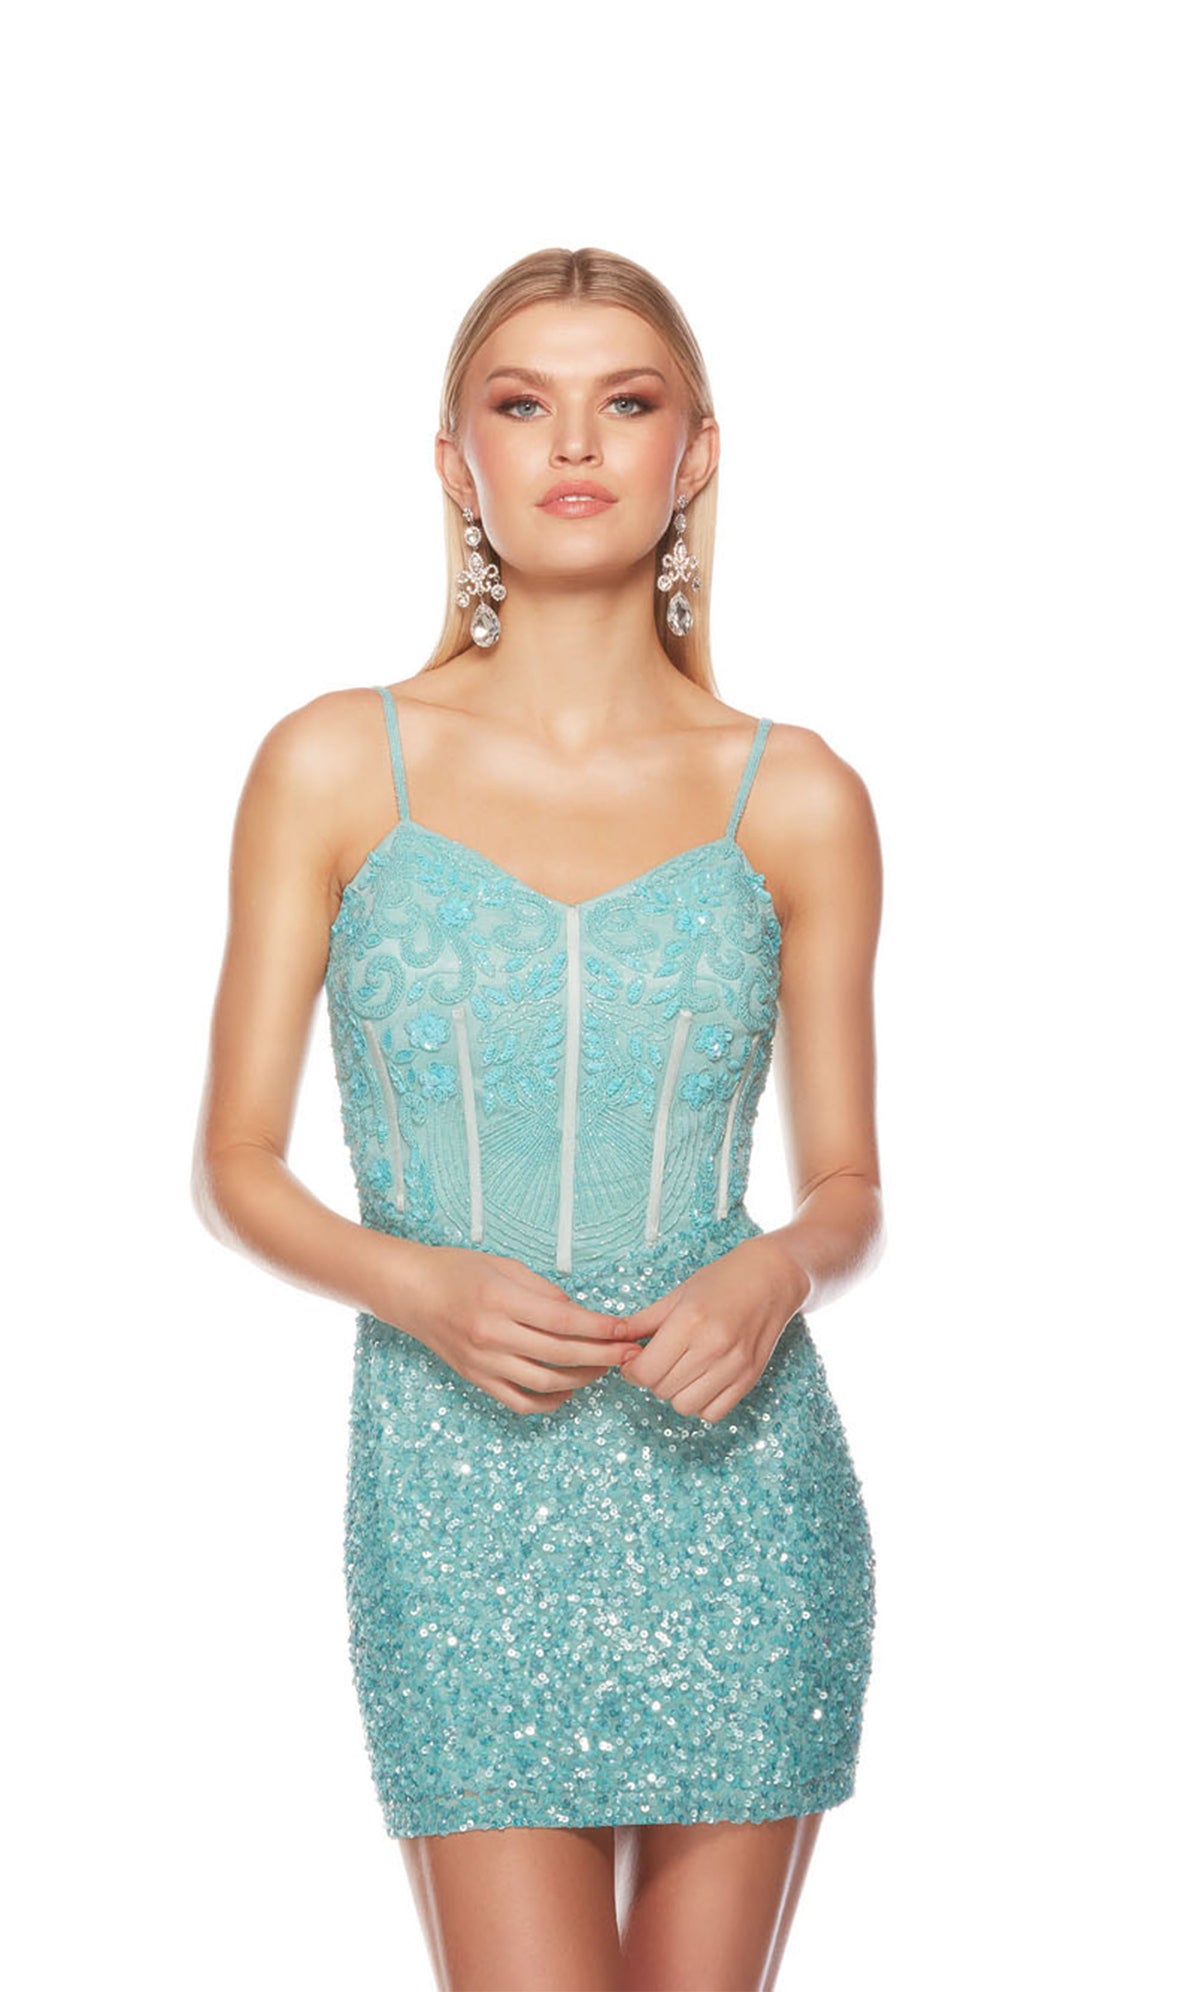 Short hand-beaded blue homecoming dress with an V neckline and lace up back for an chic and stylish look.